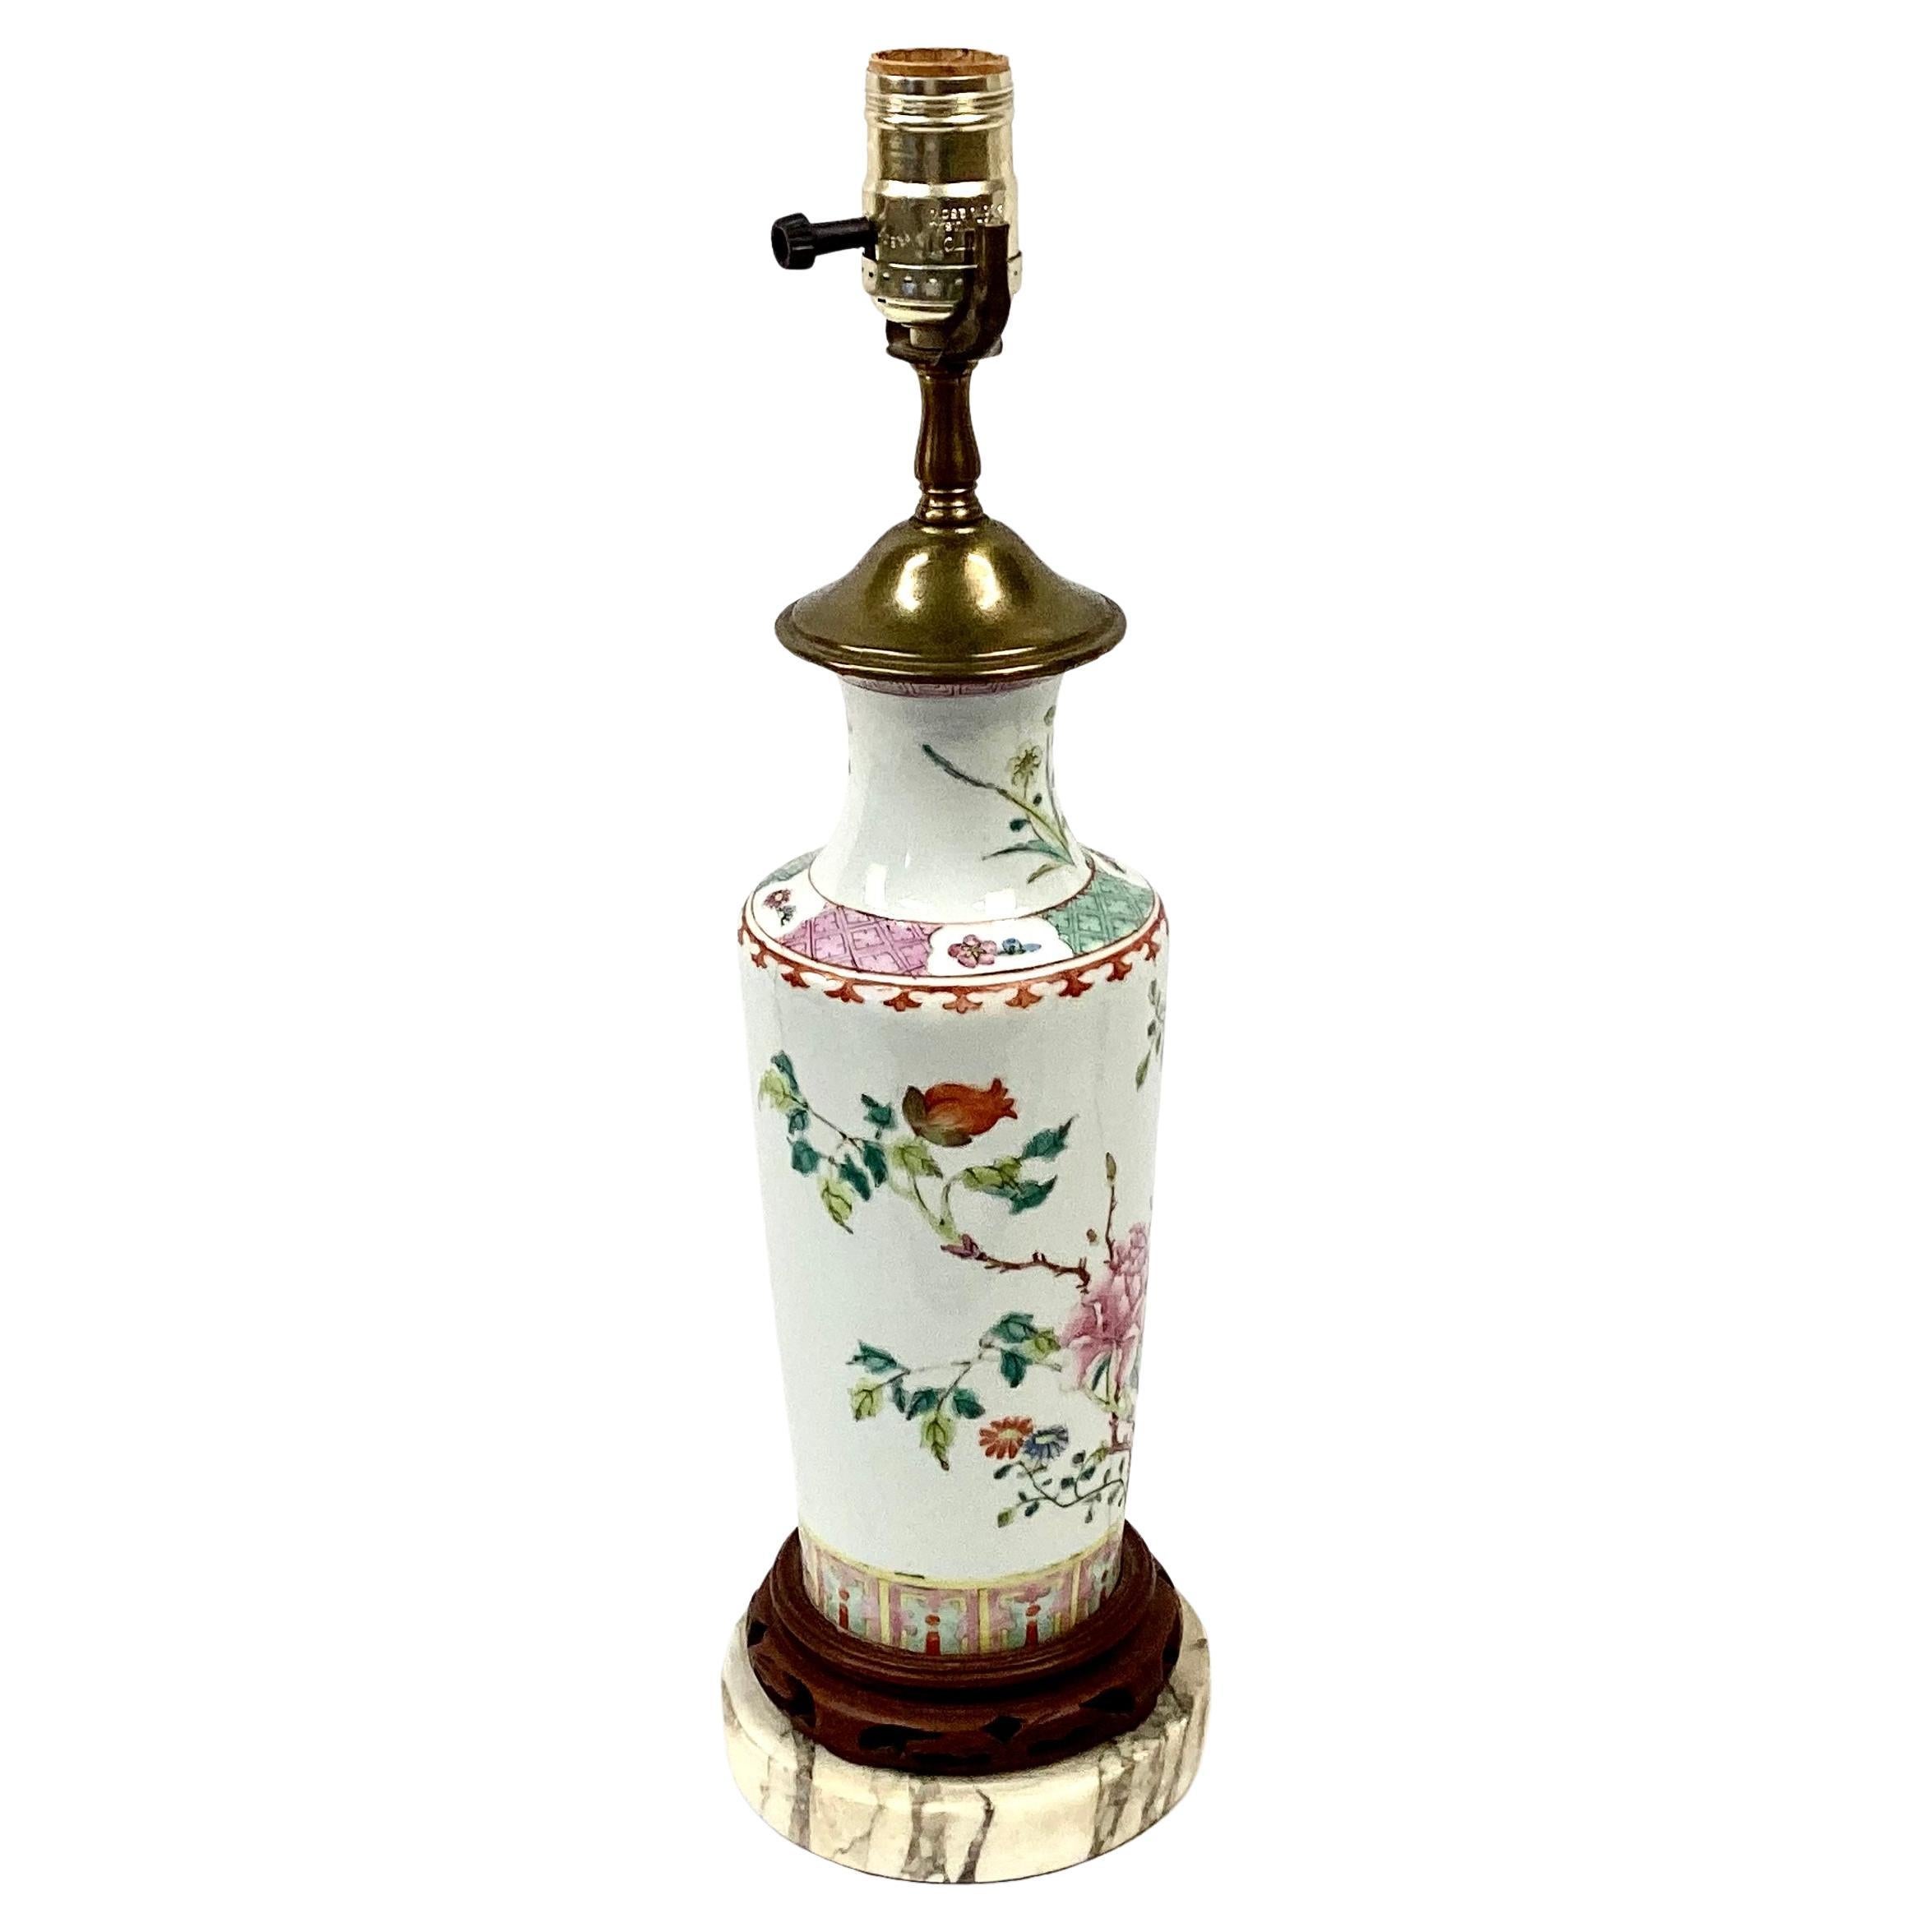 19th century Chinese famille rose floral and bird porcelain lamp. Pink, green and teal colors on a white background. Lamp sits on a carved wooden and marble base. In good working condition.